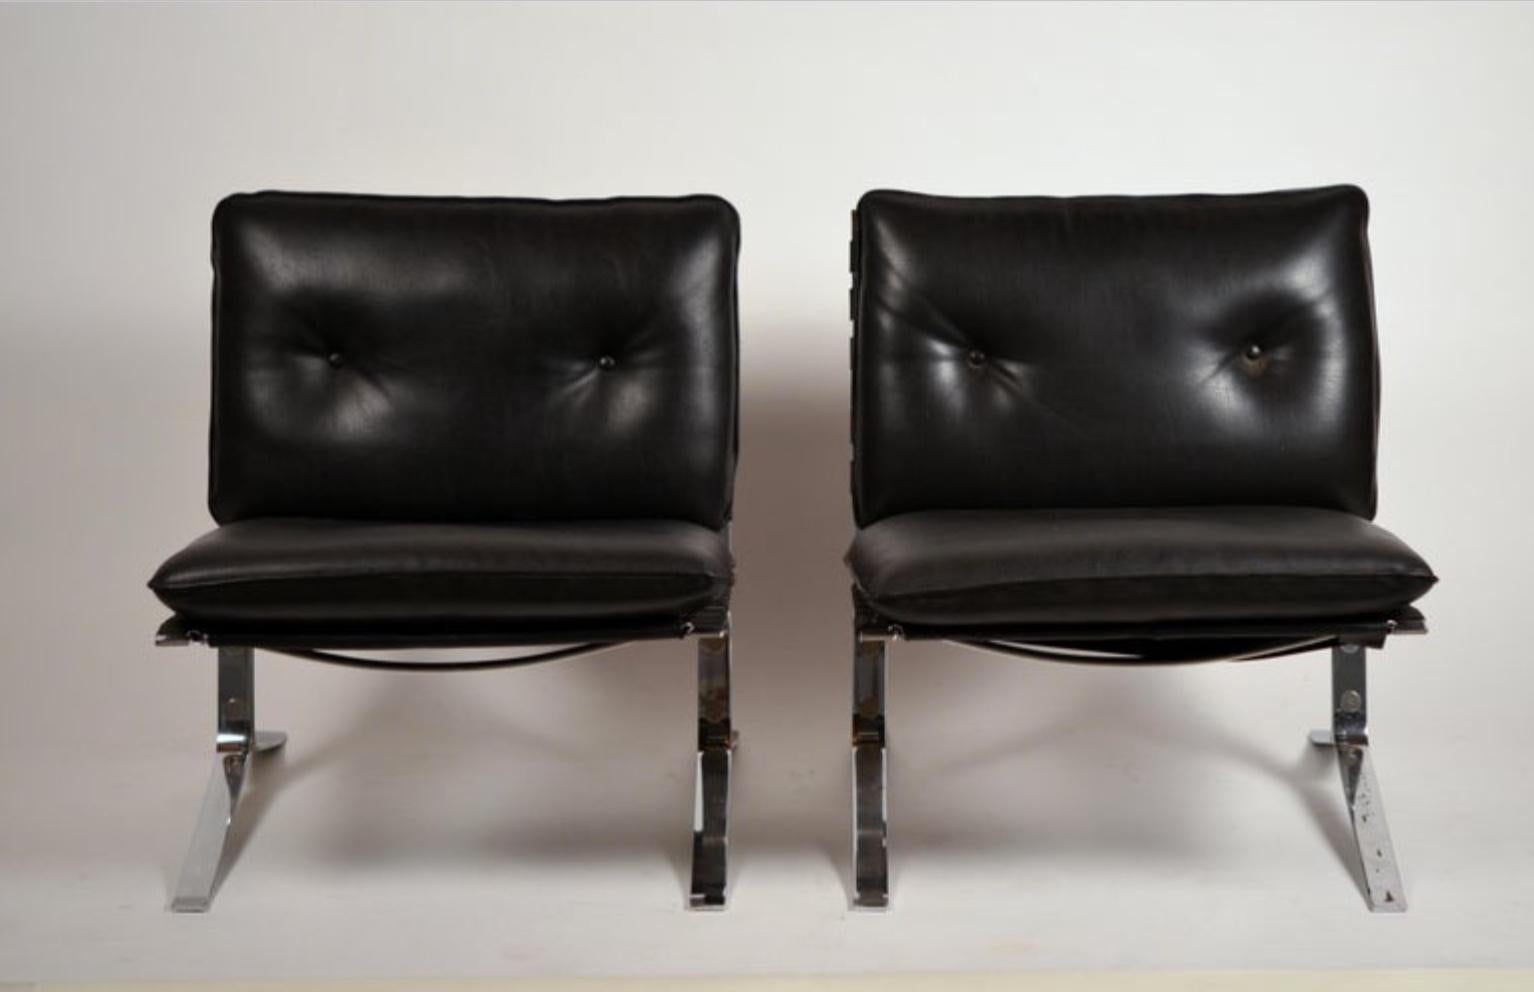 Rare Pair of Original 'Joker' Lounge Chairs by Olivier Mourgue for Airborne For Sale 4